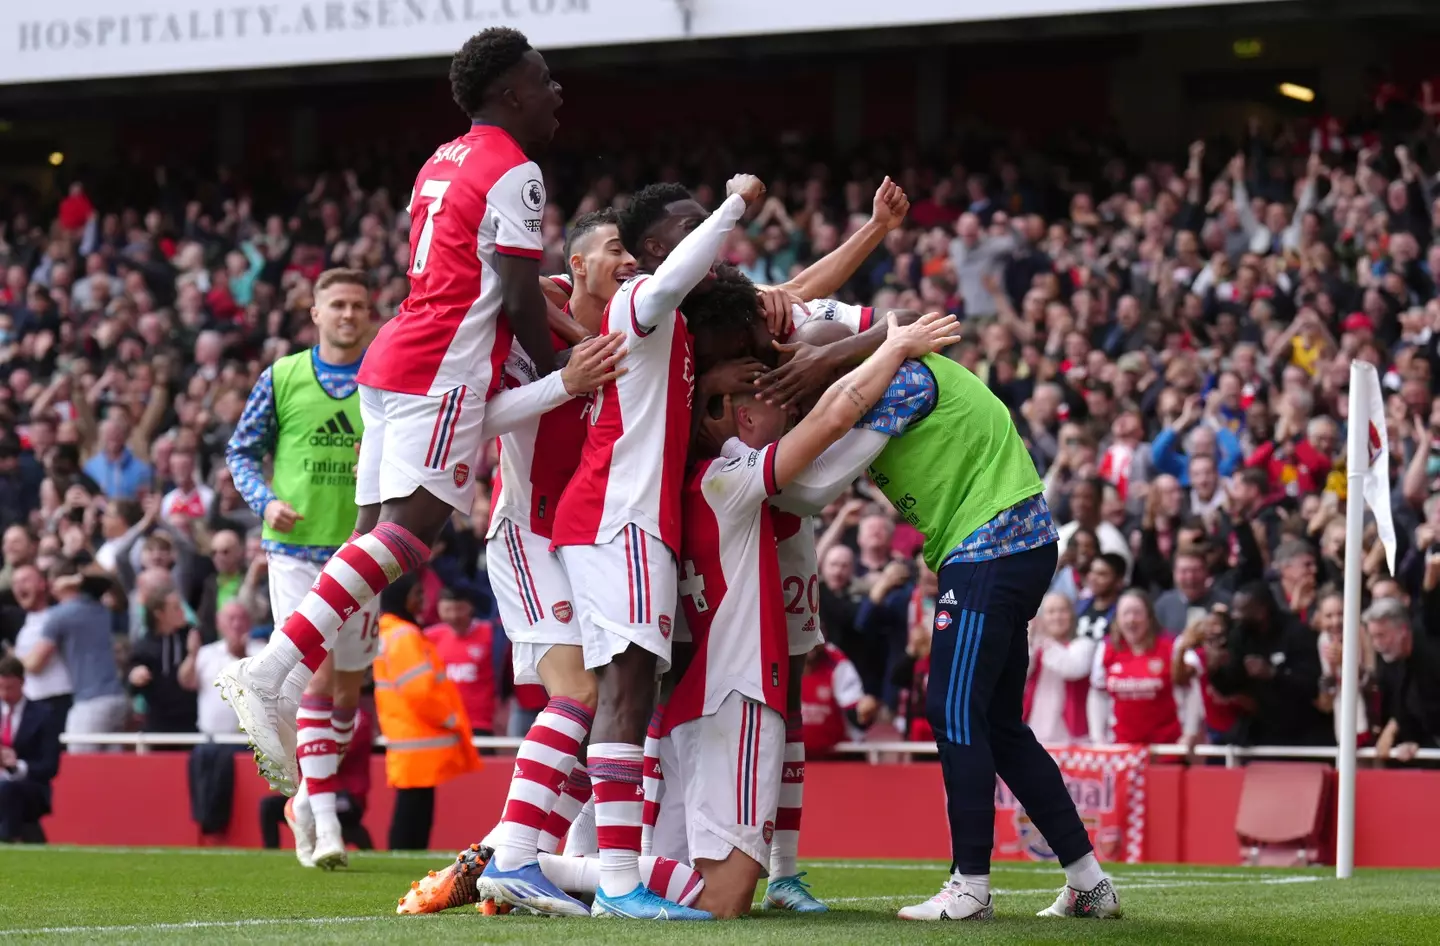 Arsenal players celebrate their team's third goal against United at the weekend. Image: PA Images